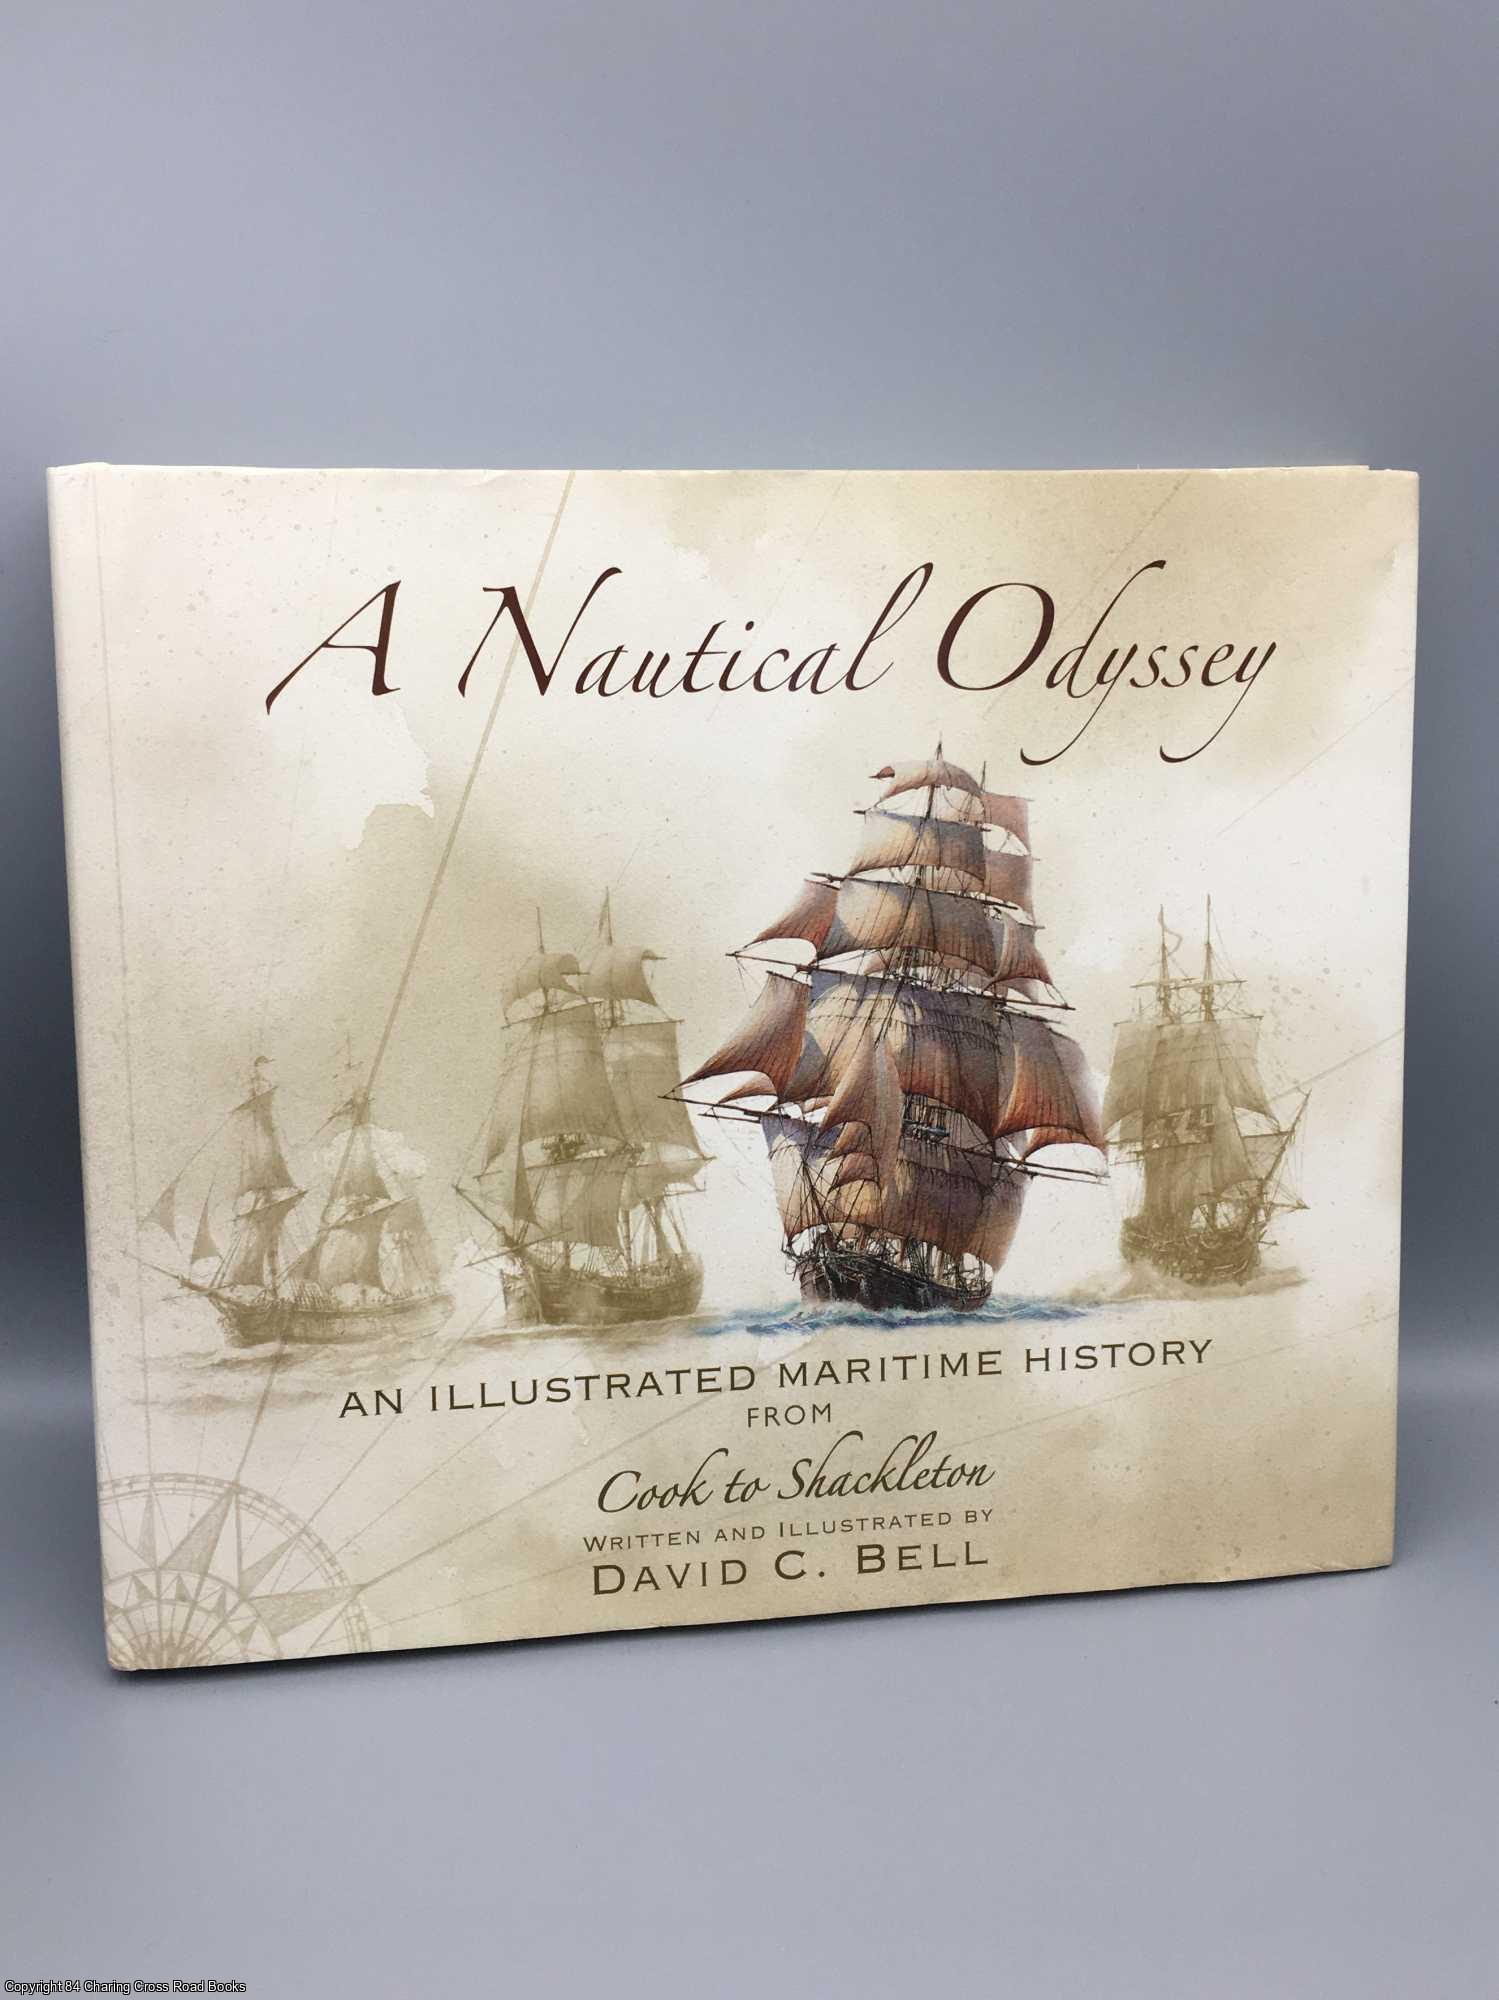 Bell, David - A Nautical Odyssey: Illustrated Maritime History, Cook to Shackleton